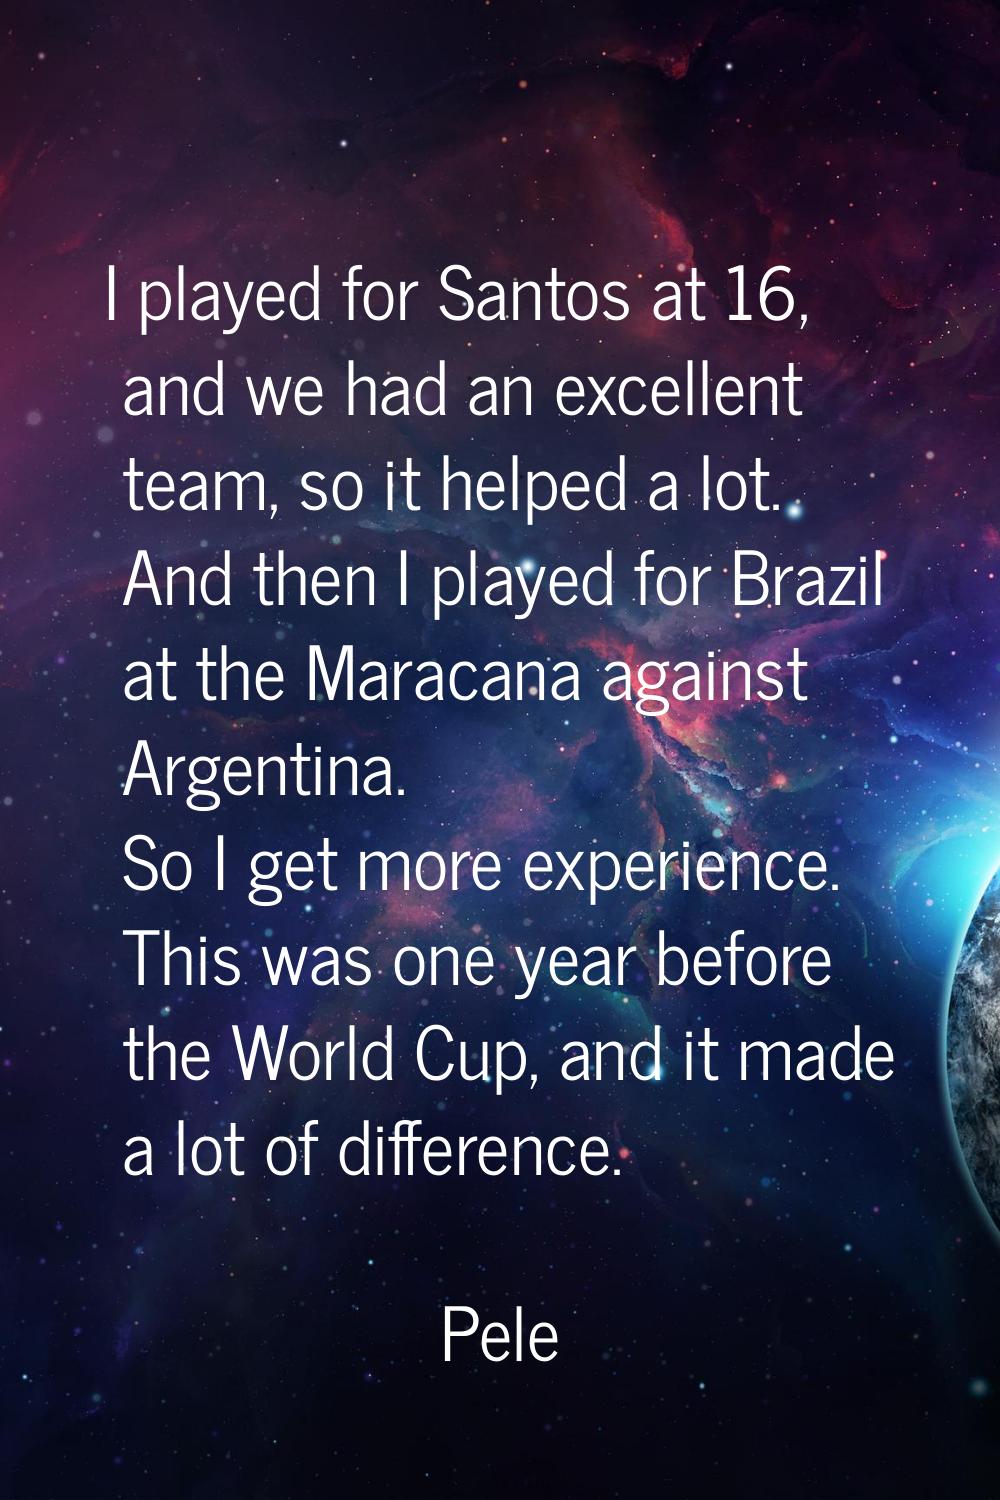 I played for Santos at 16, and we had an excellent team, so it helped a lot. And then I played for 